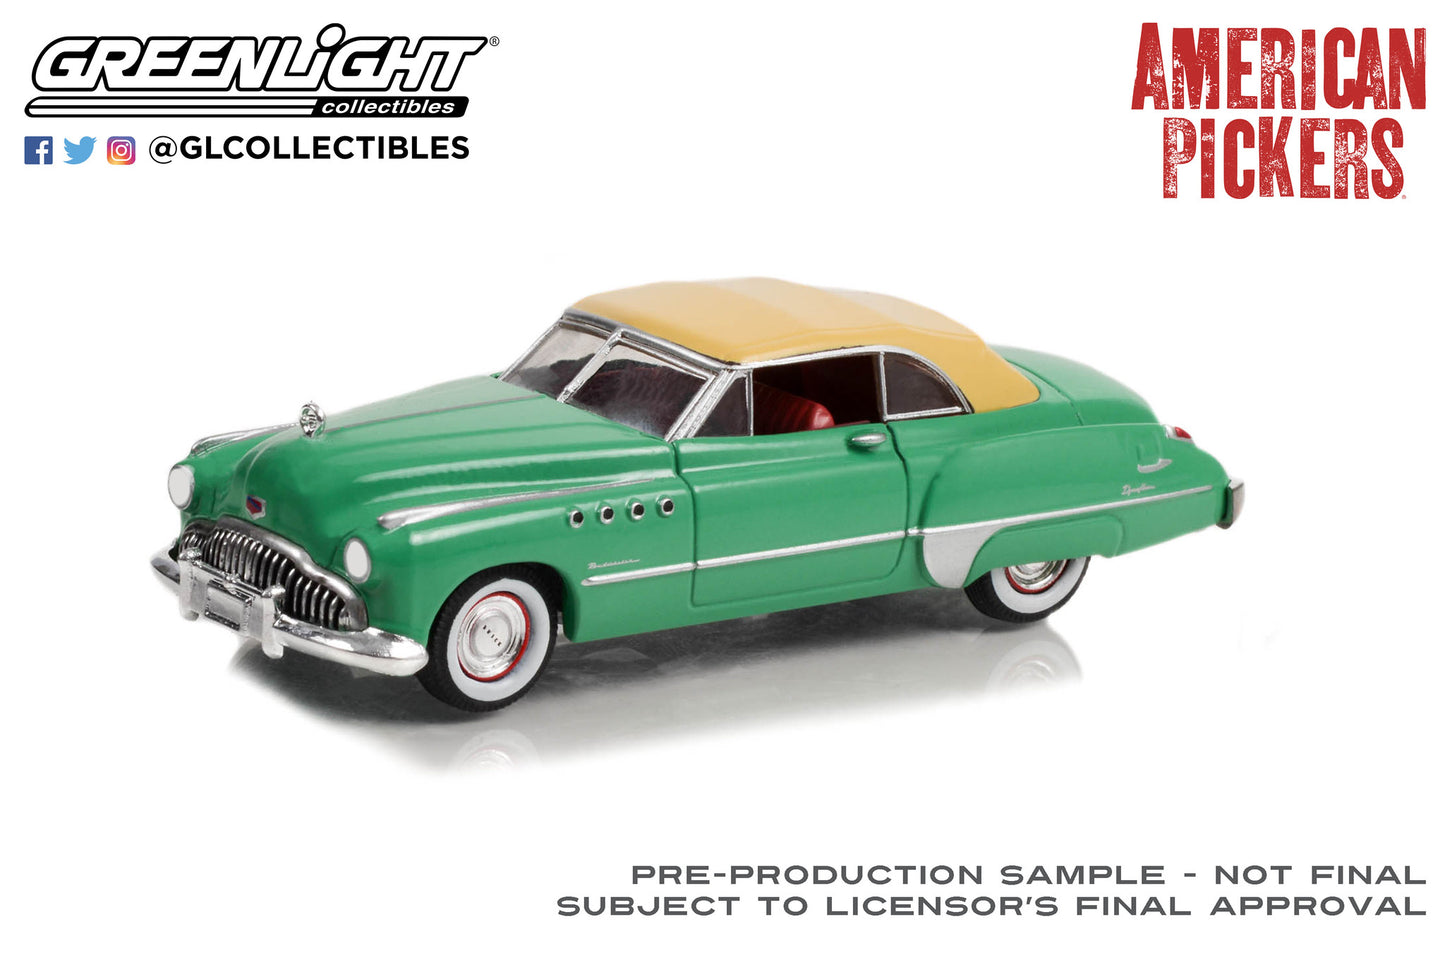 GreenLight 1:64 Hollywood Series 37 - American Pickers (2010-Current TV Series) - 1949 Buick Roadmaster Convertible 44970-D